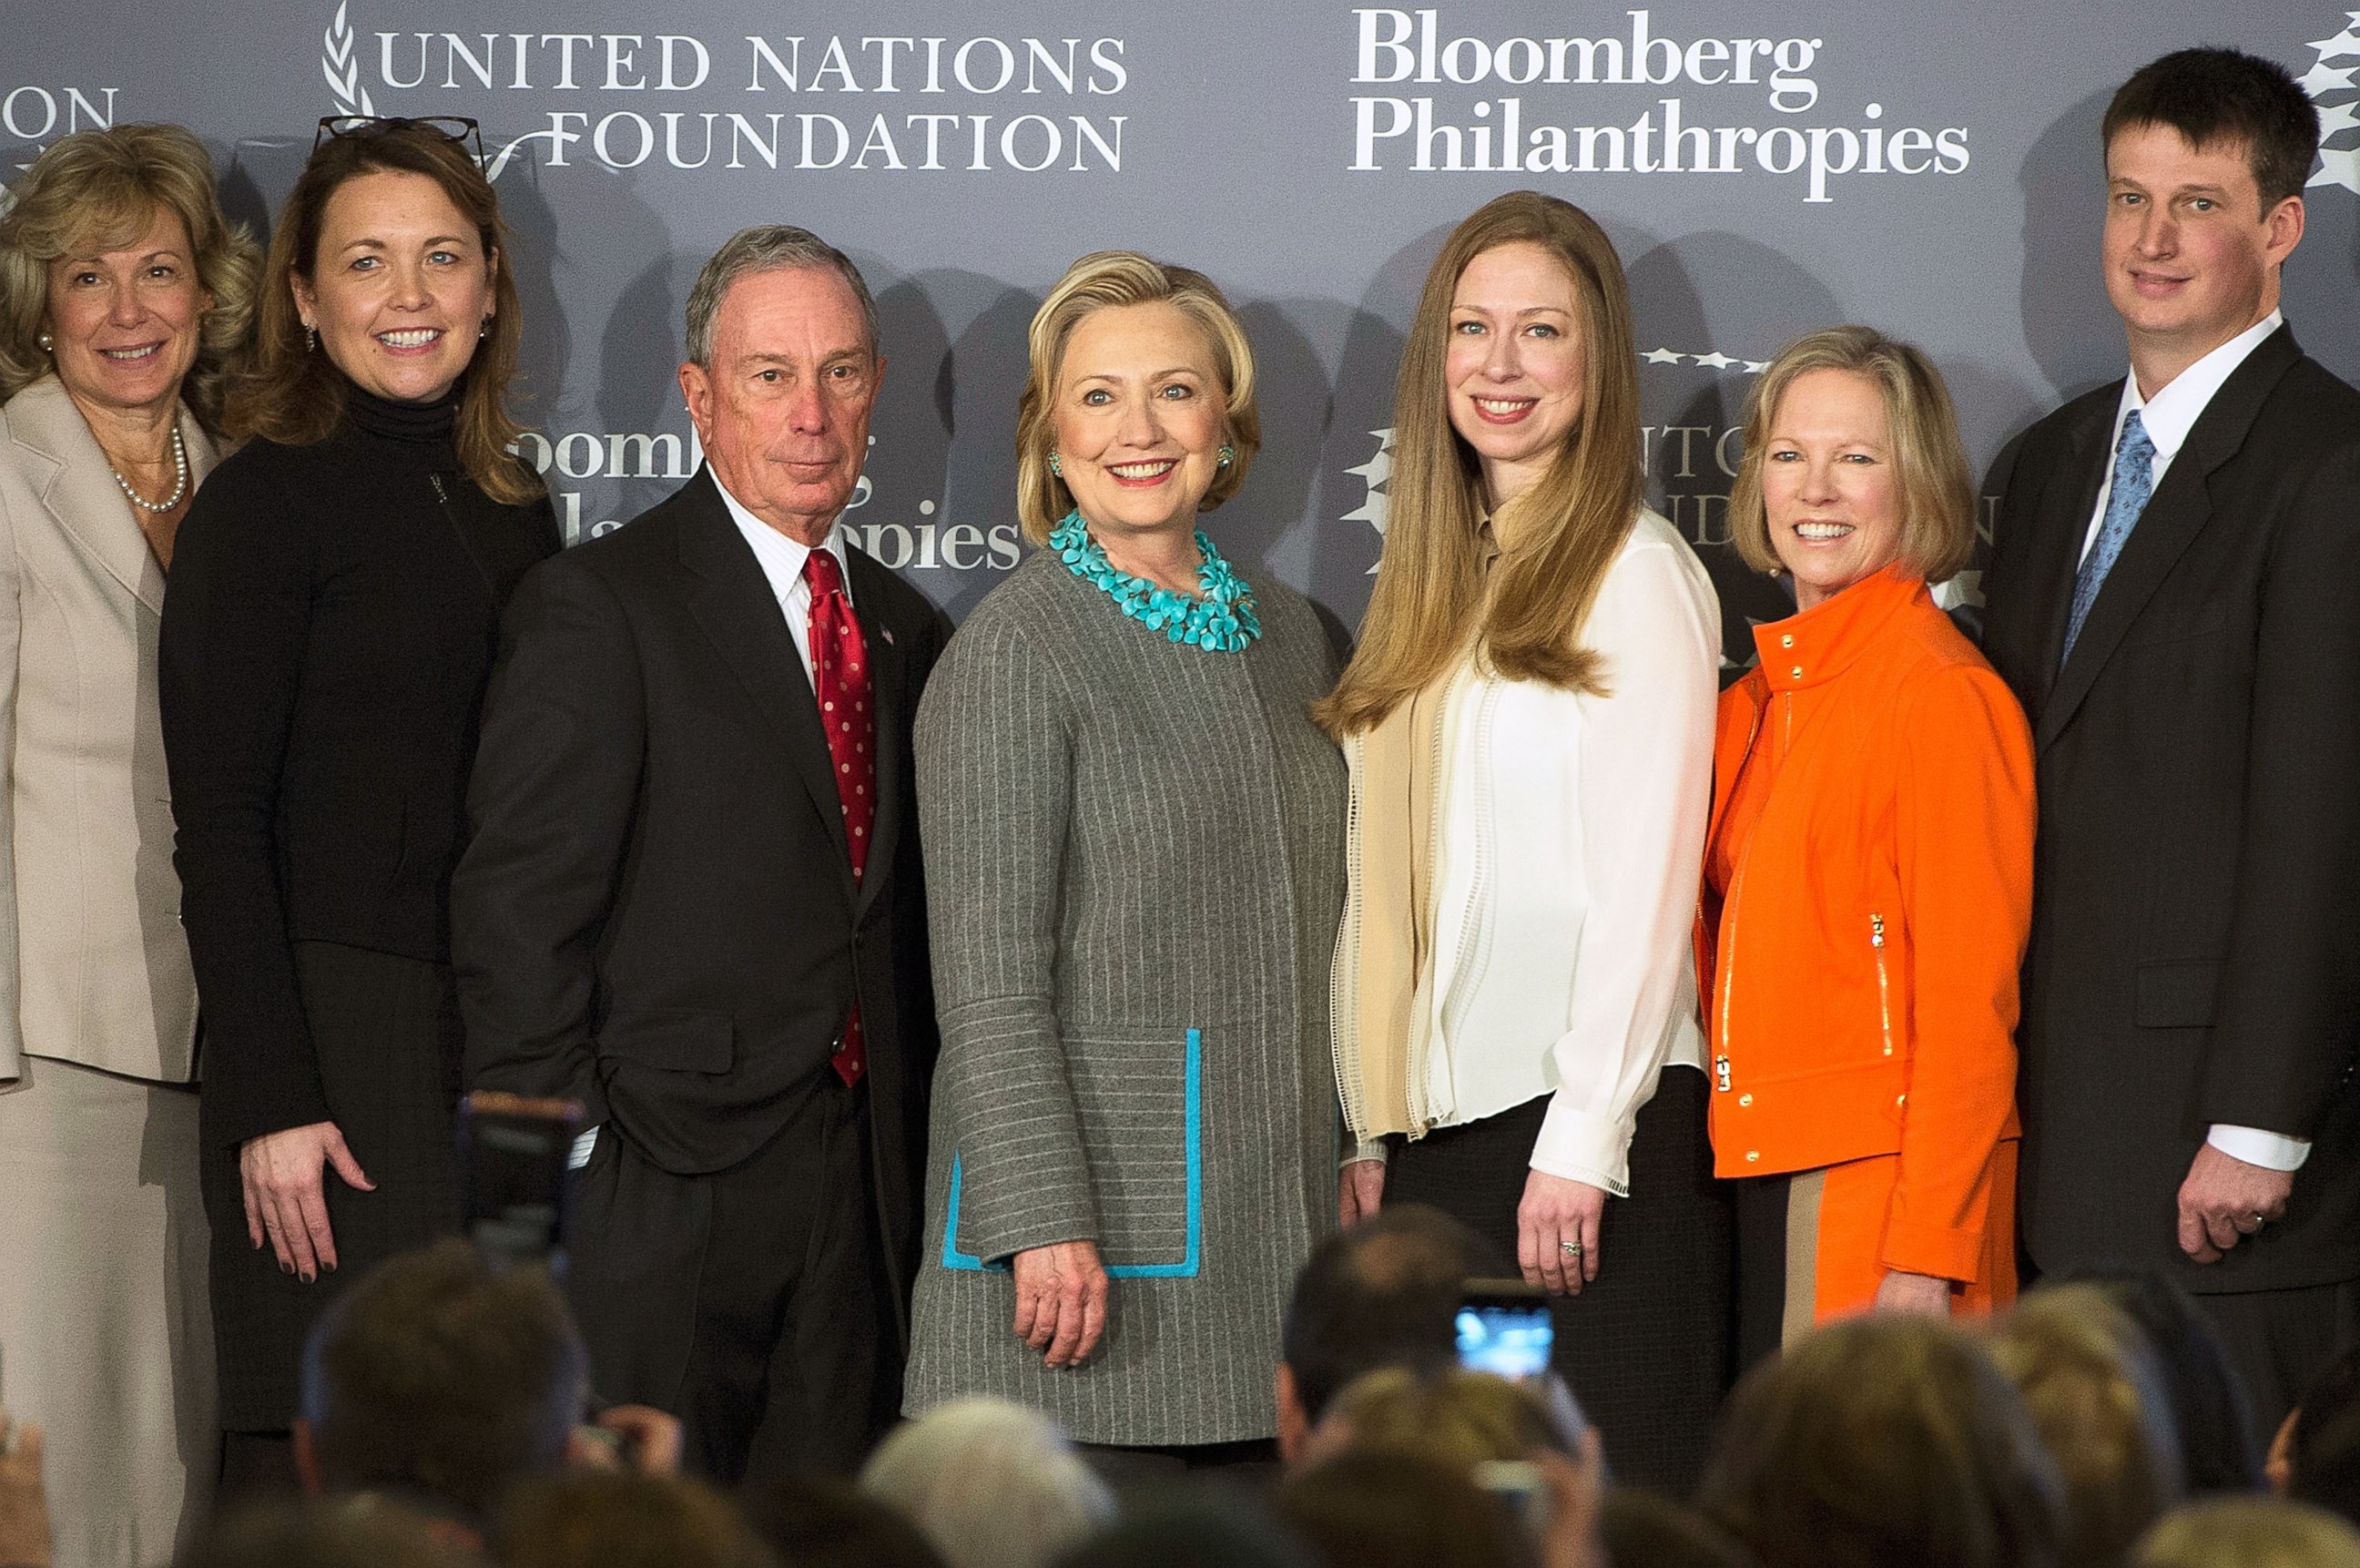 PHOTO: Michael Bloomberg and Hillary Clinton attend Data2X, discussion on the vital role data plays in closing gender gaps, and how lack of data can inhibit progress for women and girls globally at Bloomberg Philanthropies on Dec. 15, 2014 in New York. 